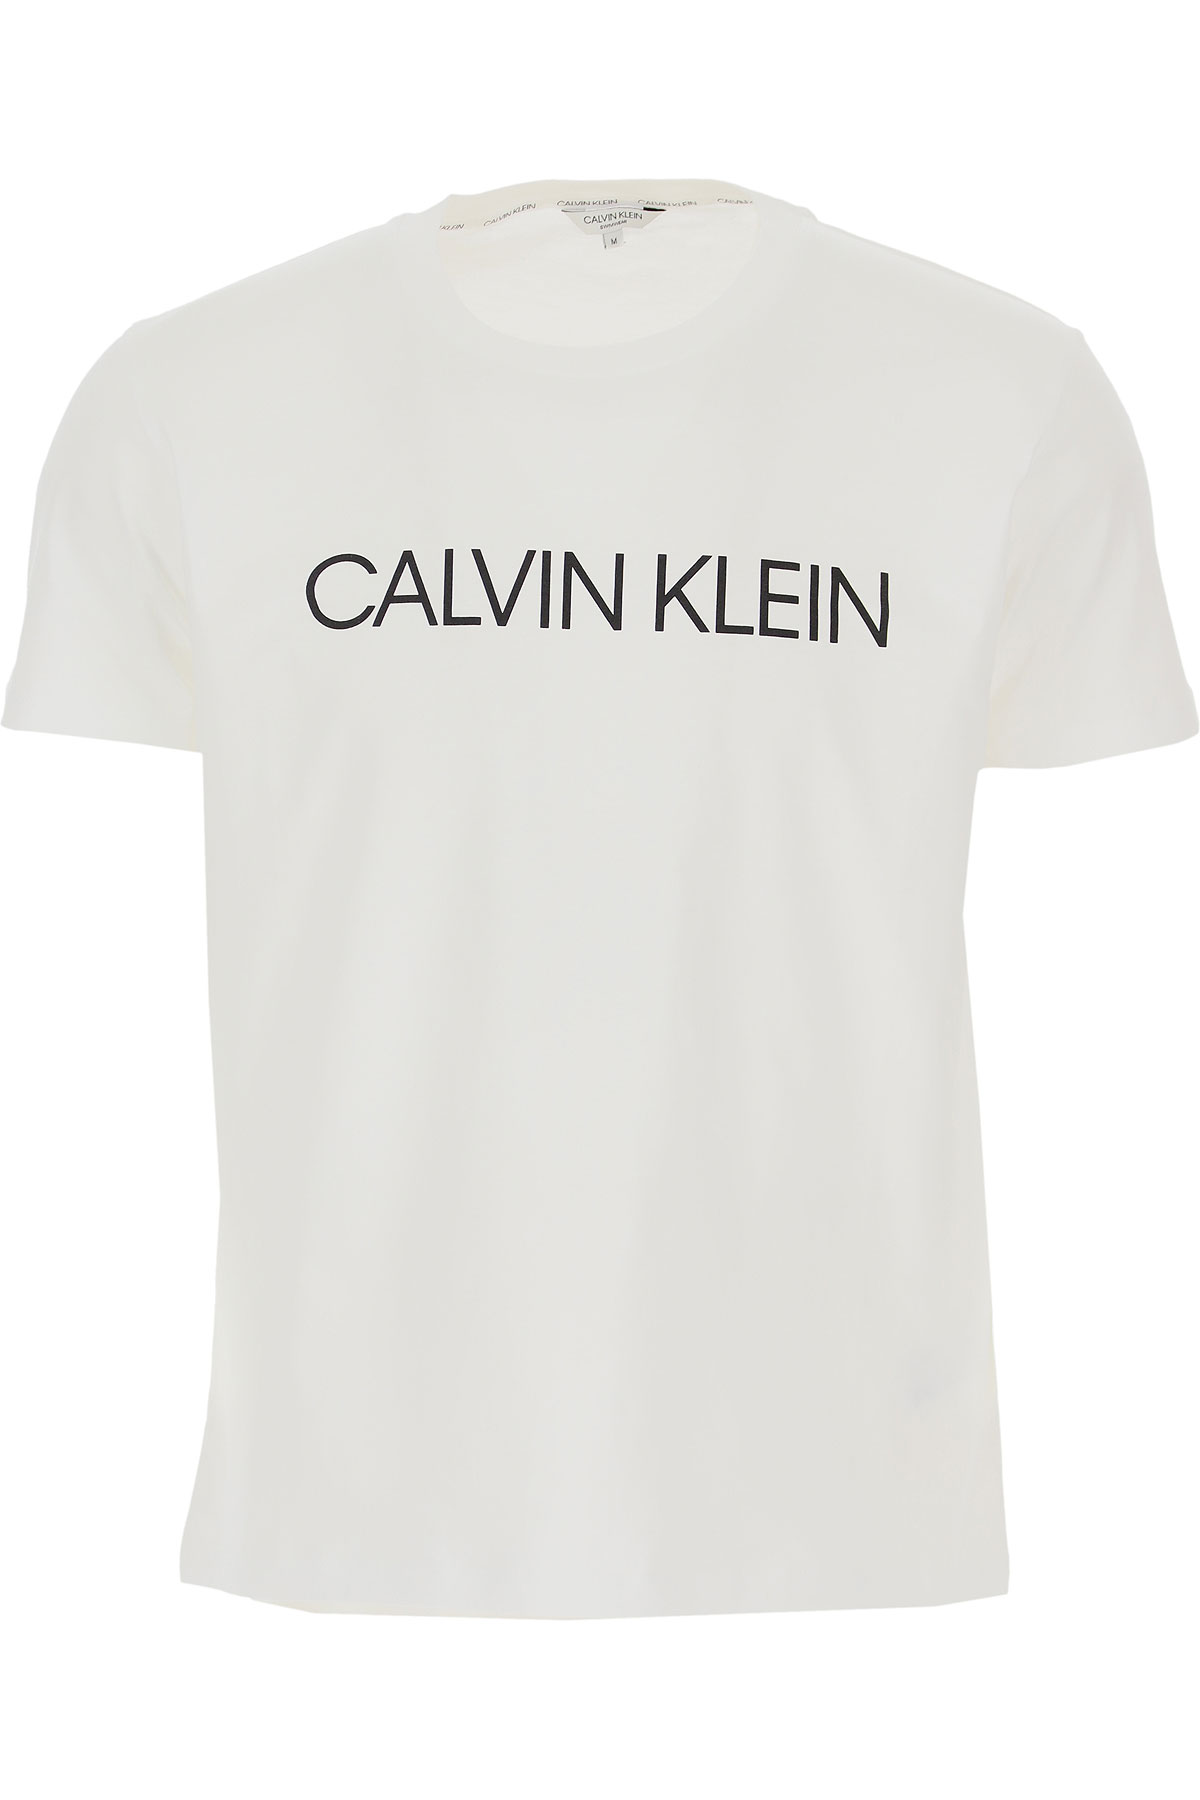 Mens Clothing Calvin Klein, Style code: km0km00479-ycd-